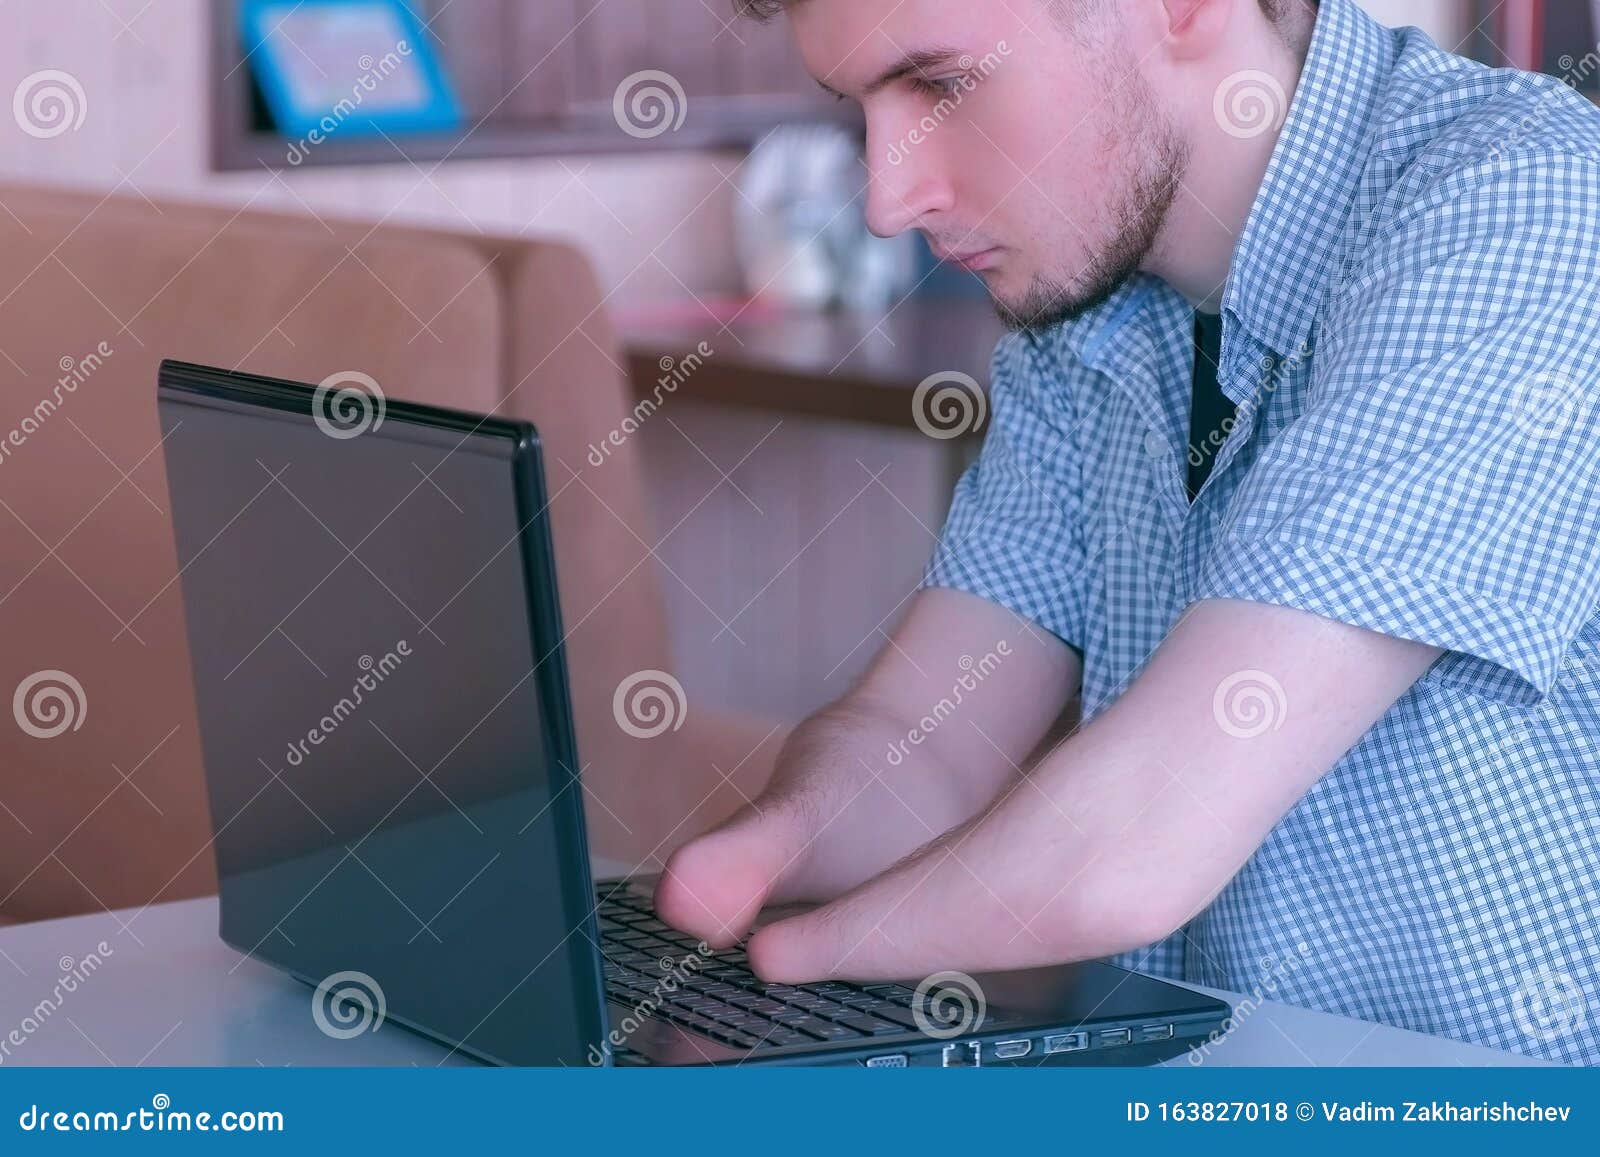 disabled-man-amputated-two-stump-hands-typing-working-laptop-cafe-portrait-disabled-man-amputated-two-stump-163827018.jpg